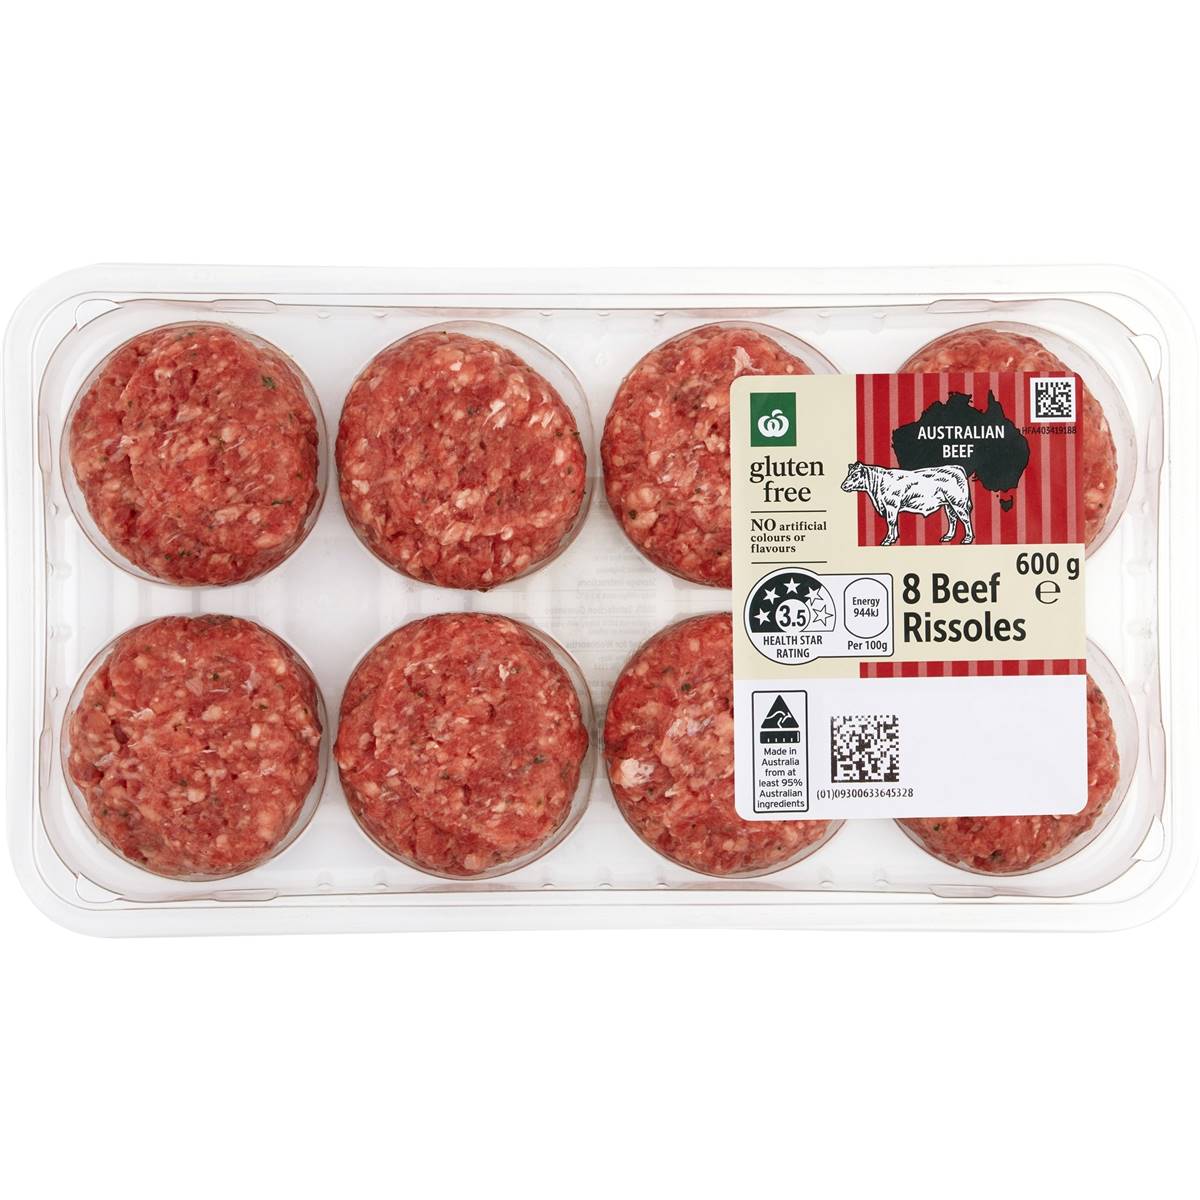 Calories in Woolworths Homestyle Beef Rissoles